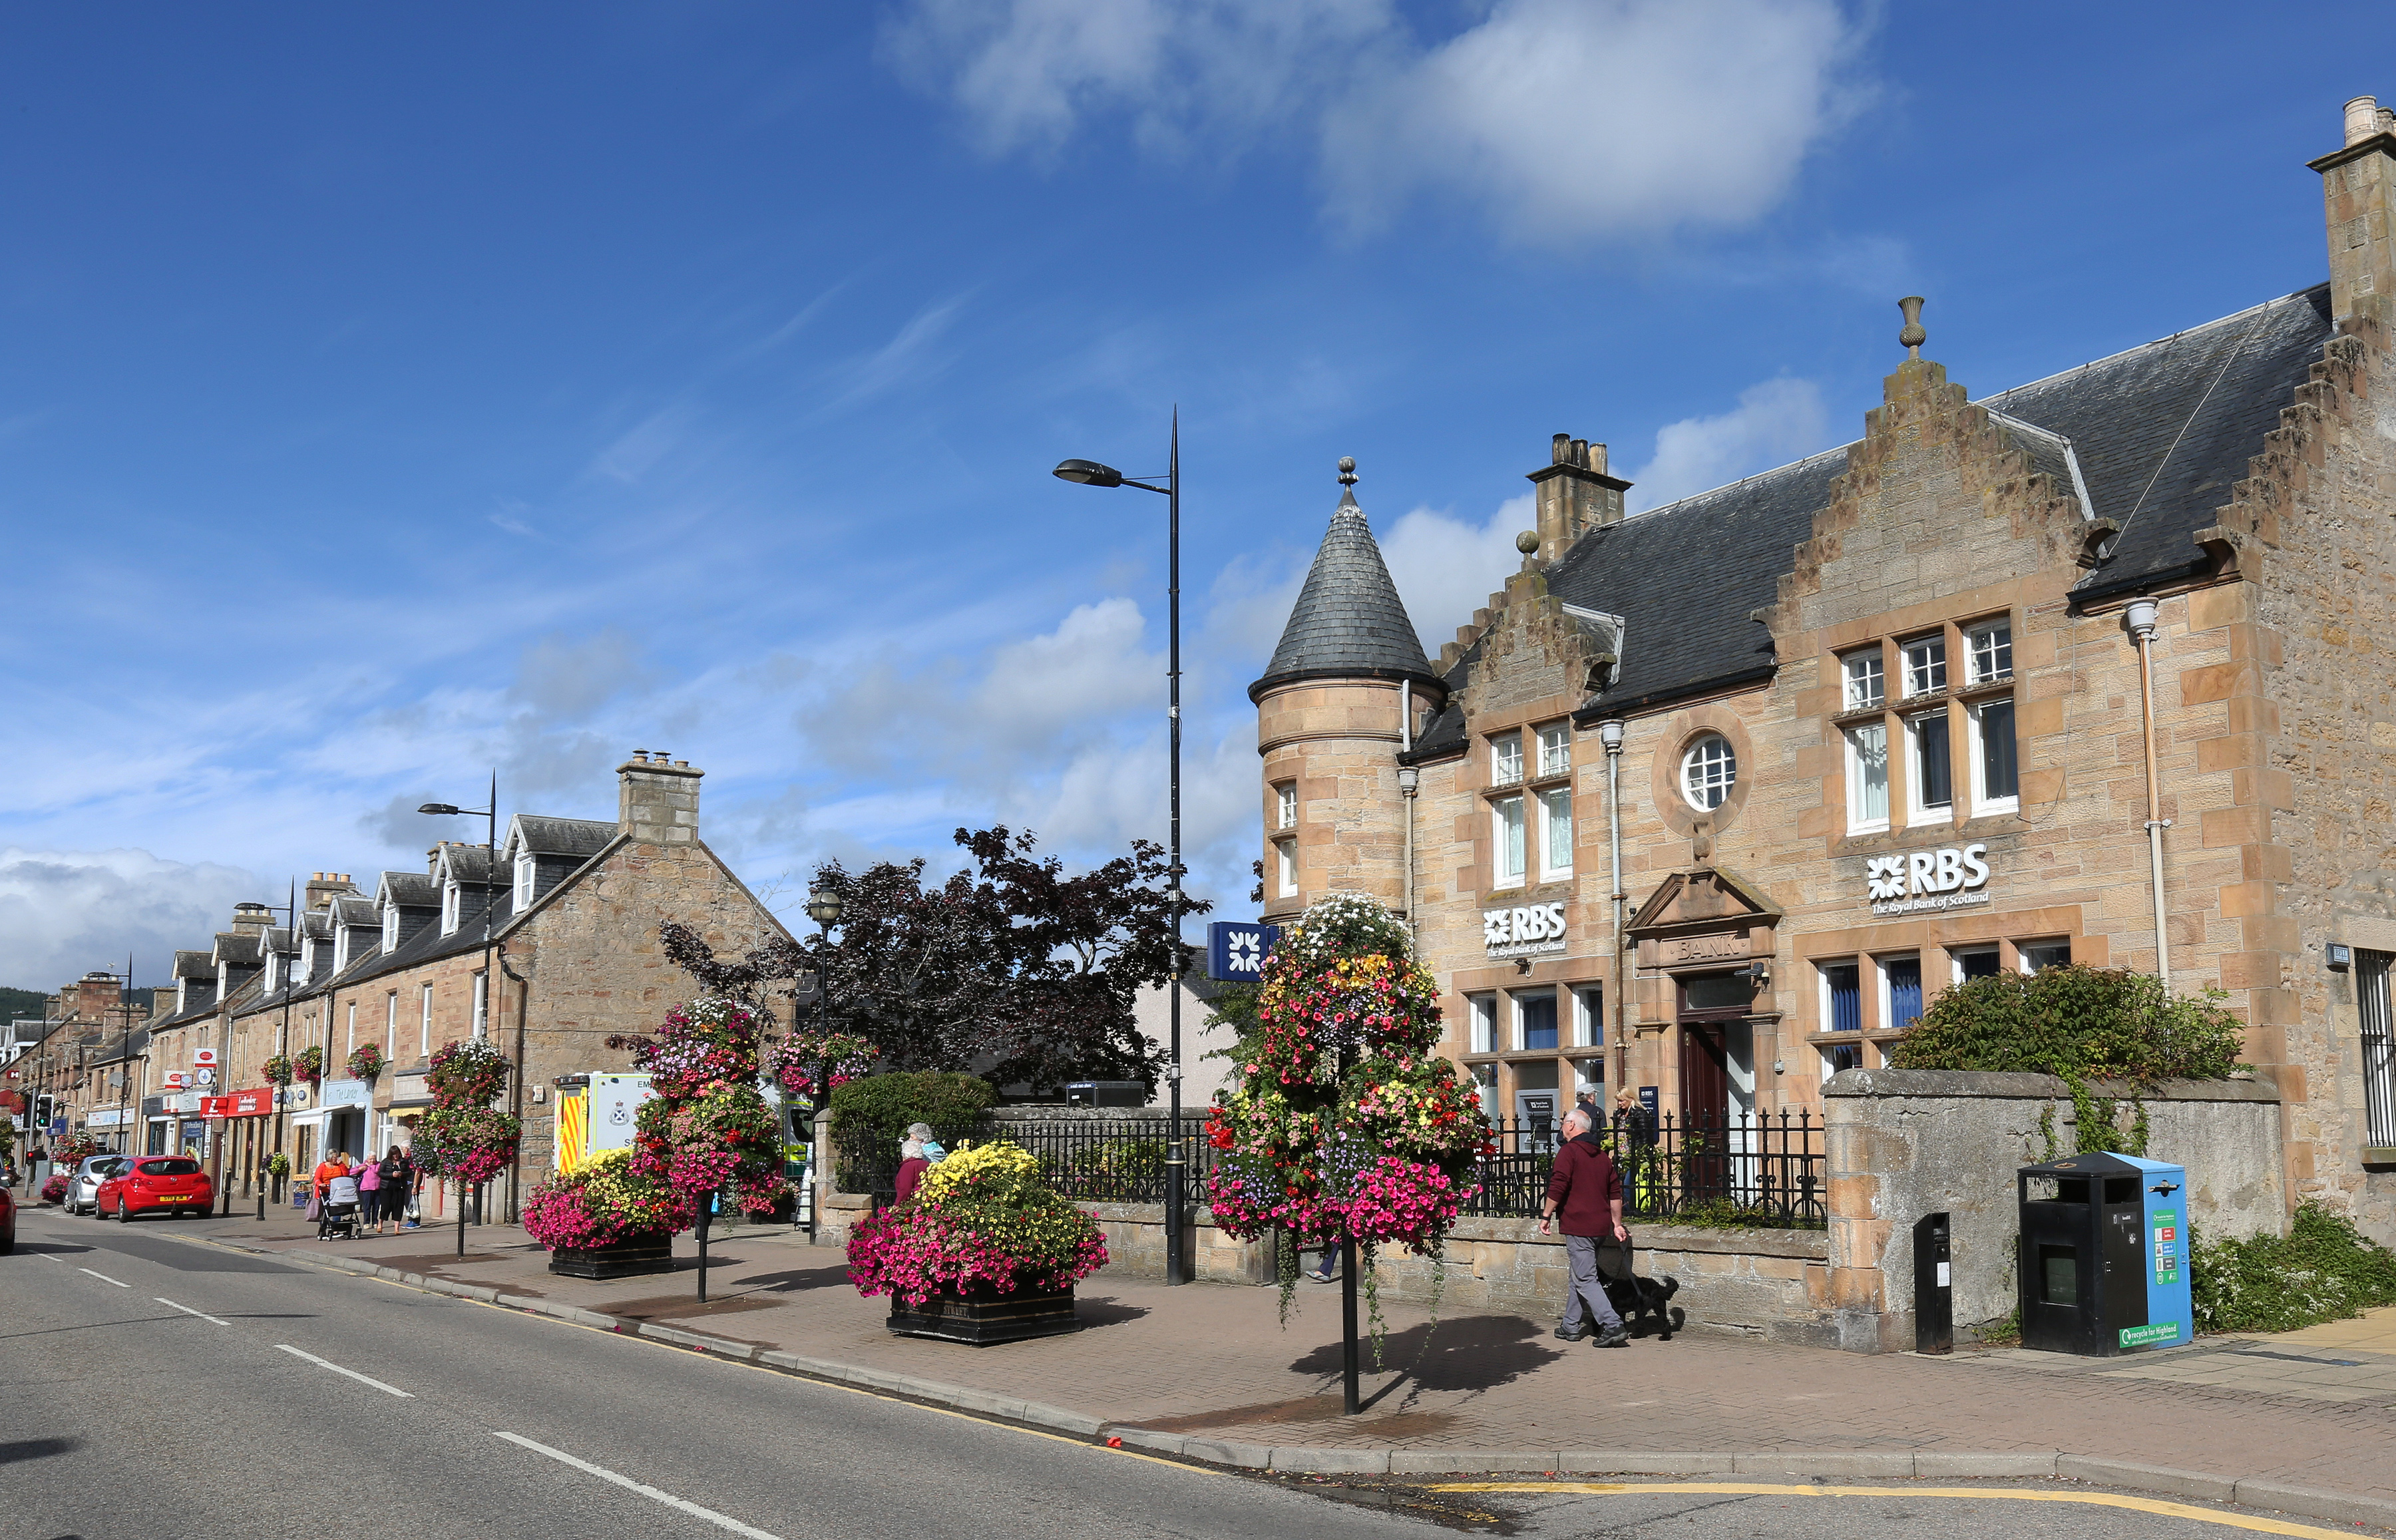 The incident took place on Alness' High Street. Image: DC Thomson